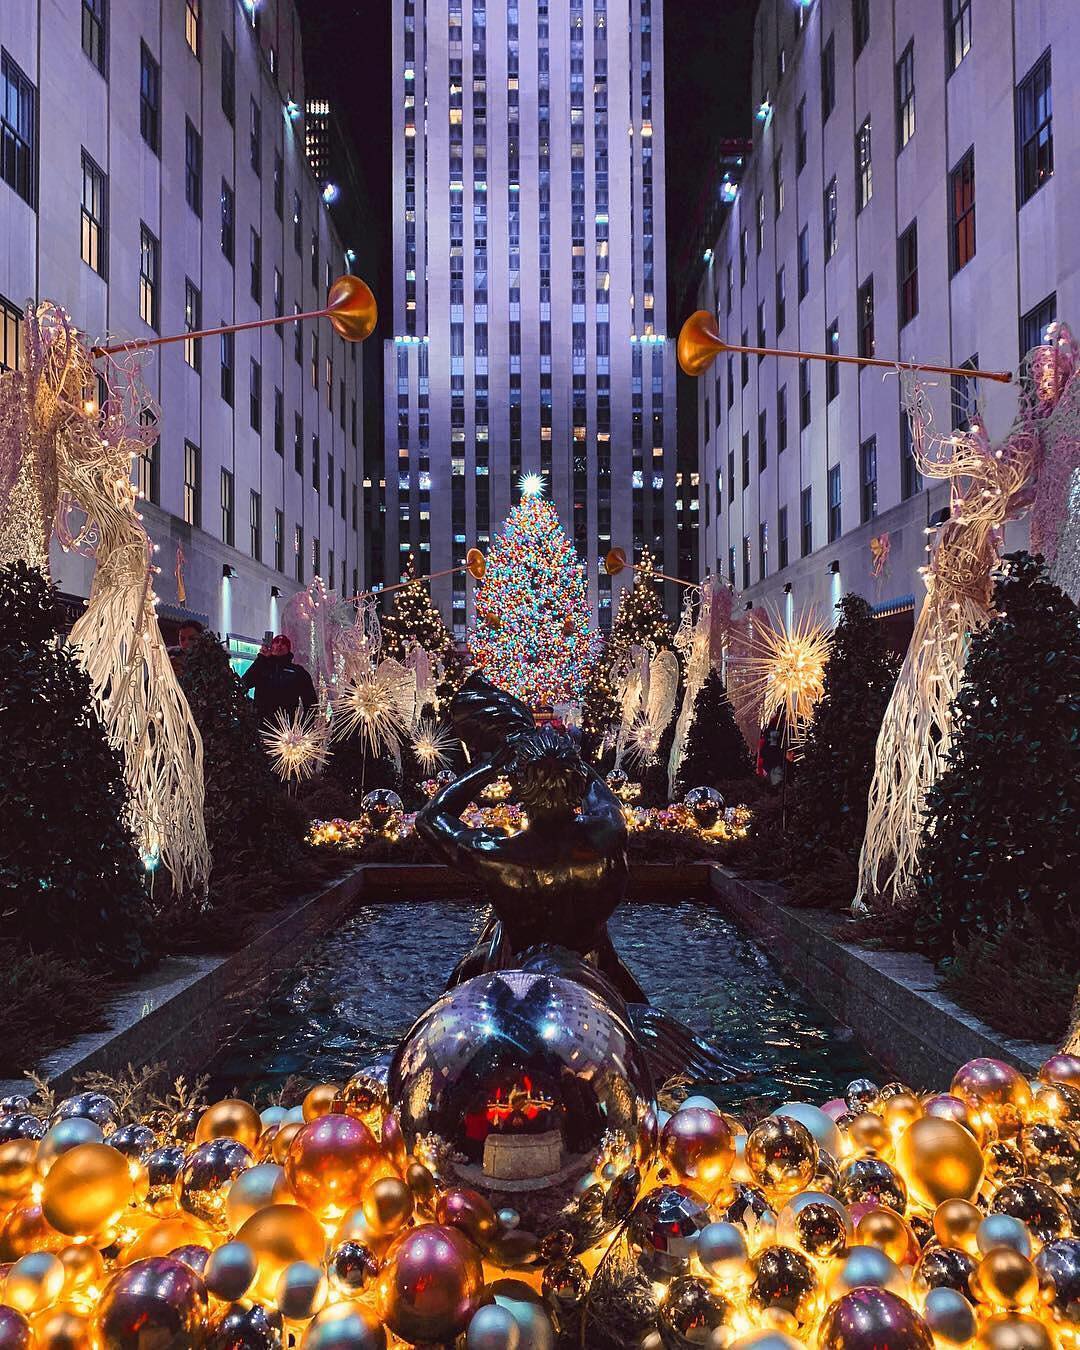 Rockefellercenter covered in light angels and giant tree. Photo by Instagram user @donniedushi